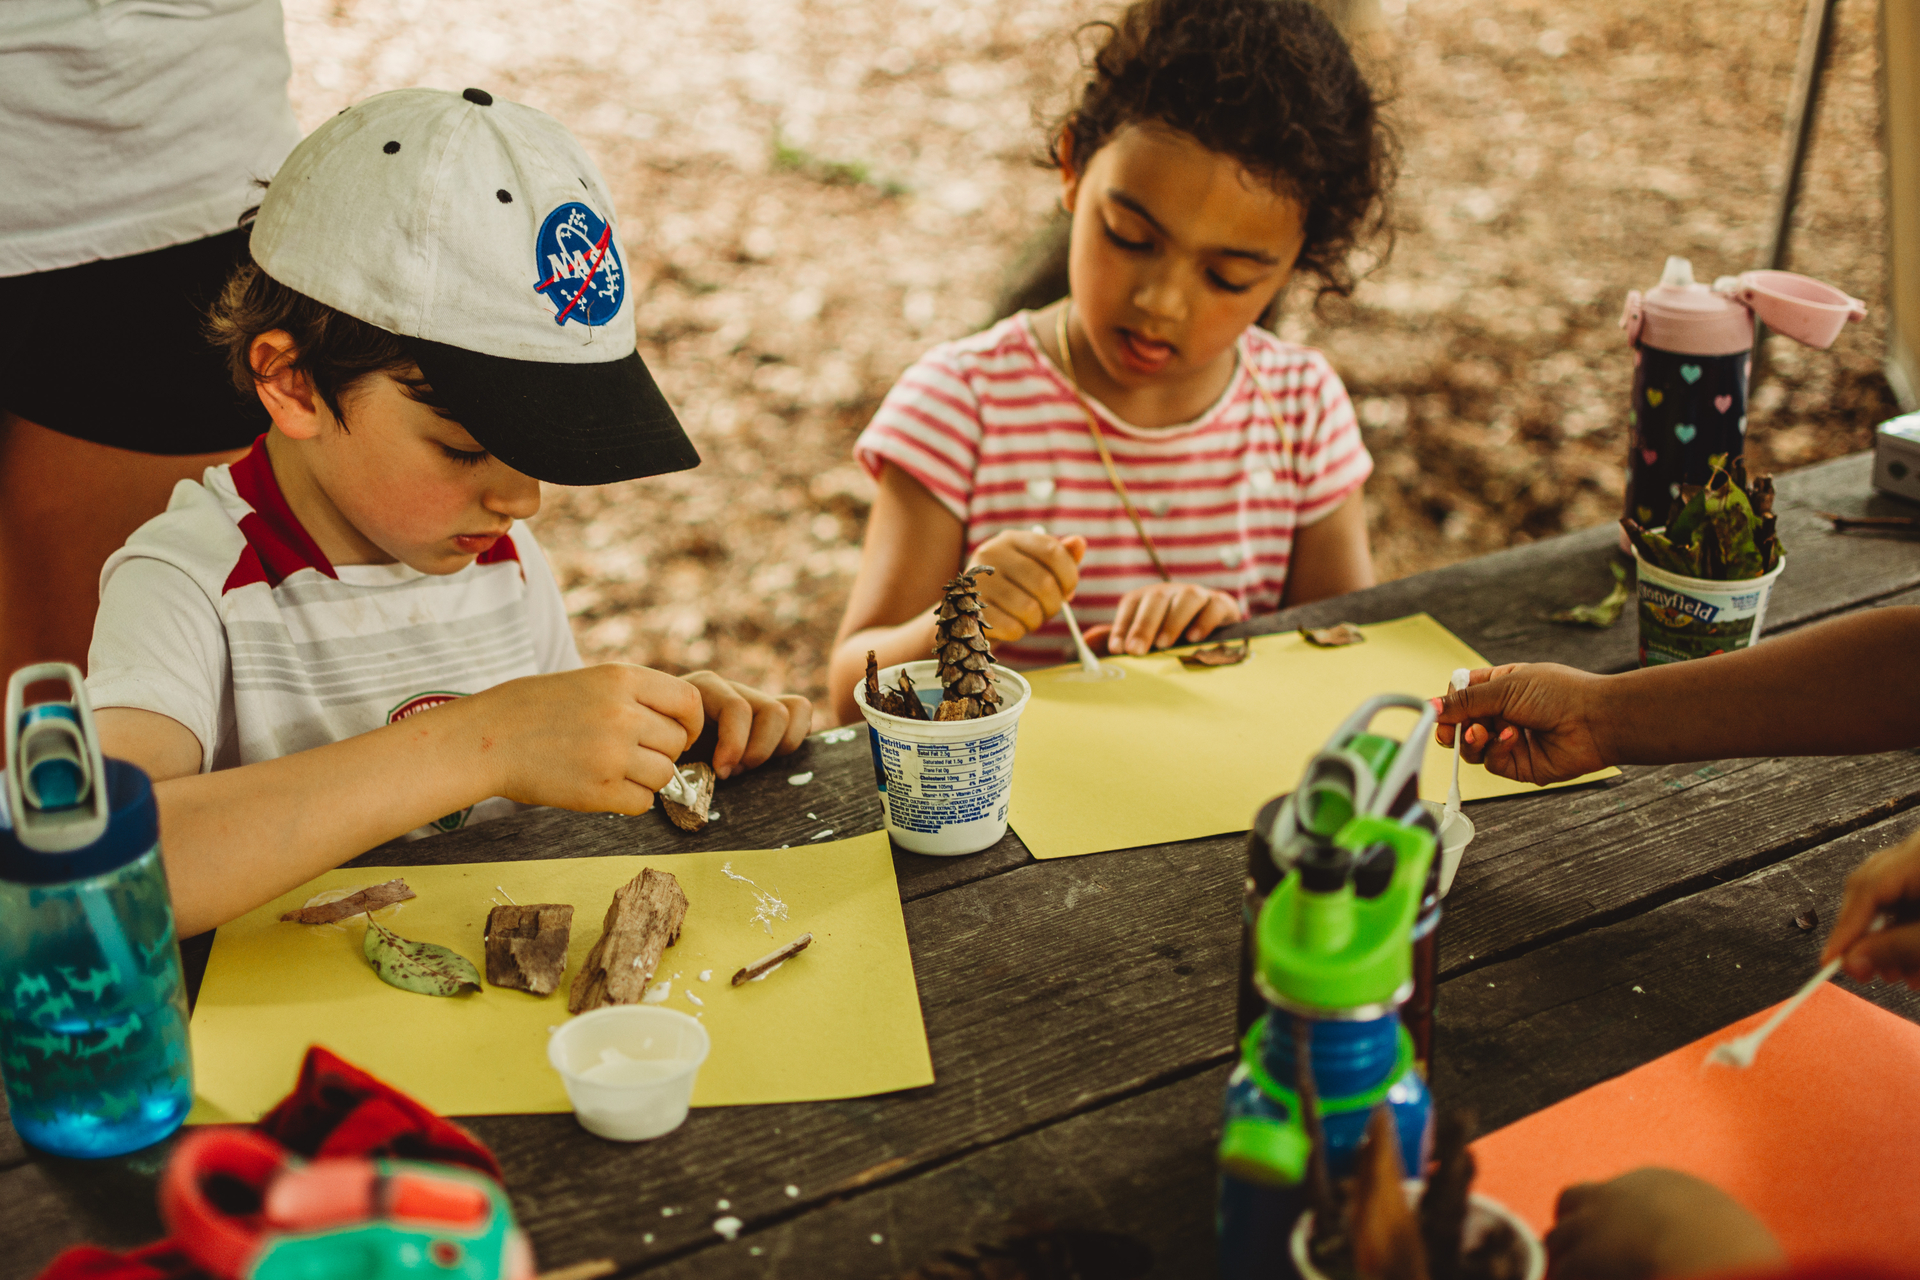 Two campers at Moose Hill Nature Camp making art with construction paper, glue, and natural objects like bark, leaves, and cones